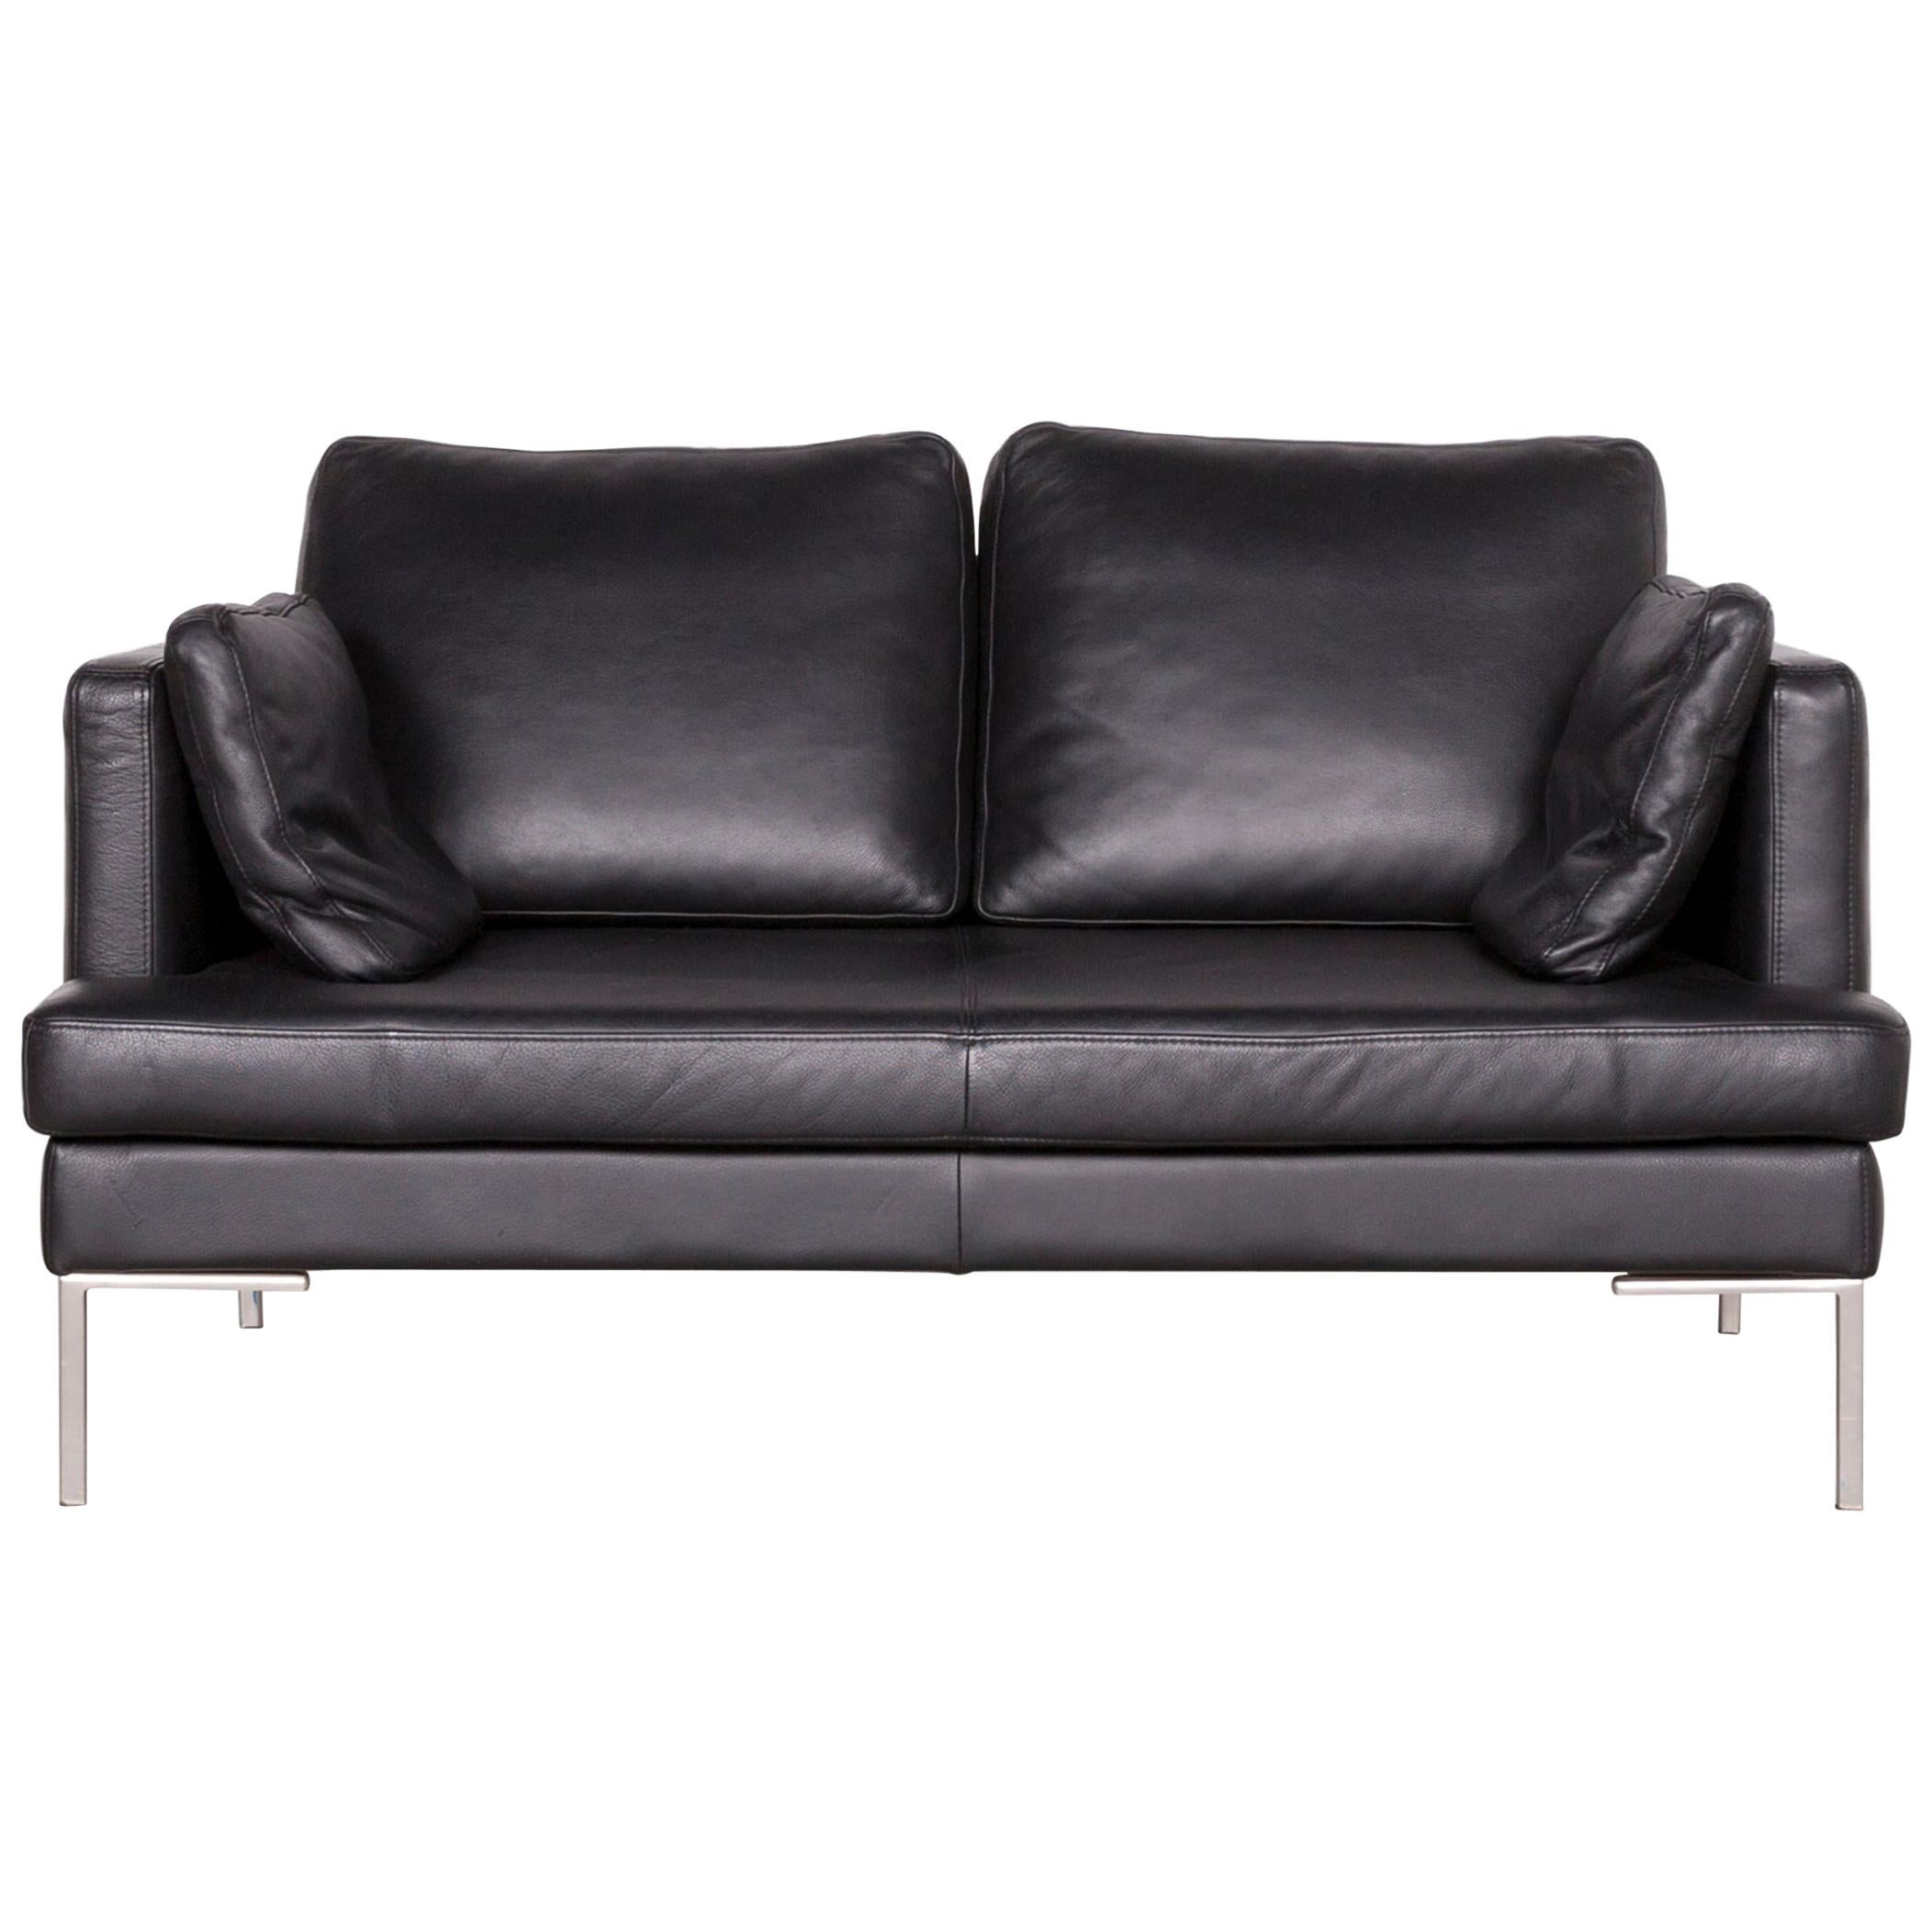 Boconcept Designer Leather Sofa Black Two-Seat Couch For Sale